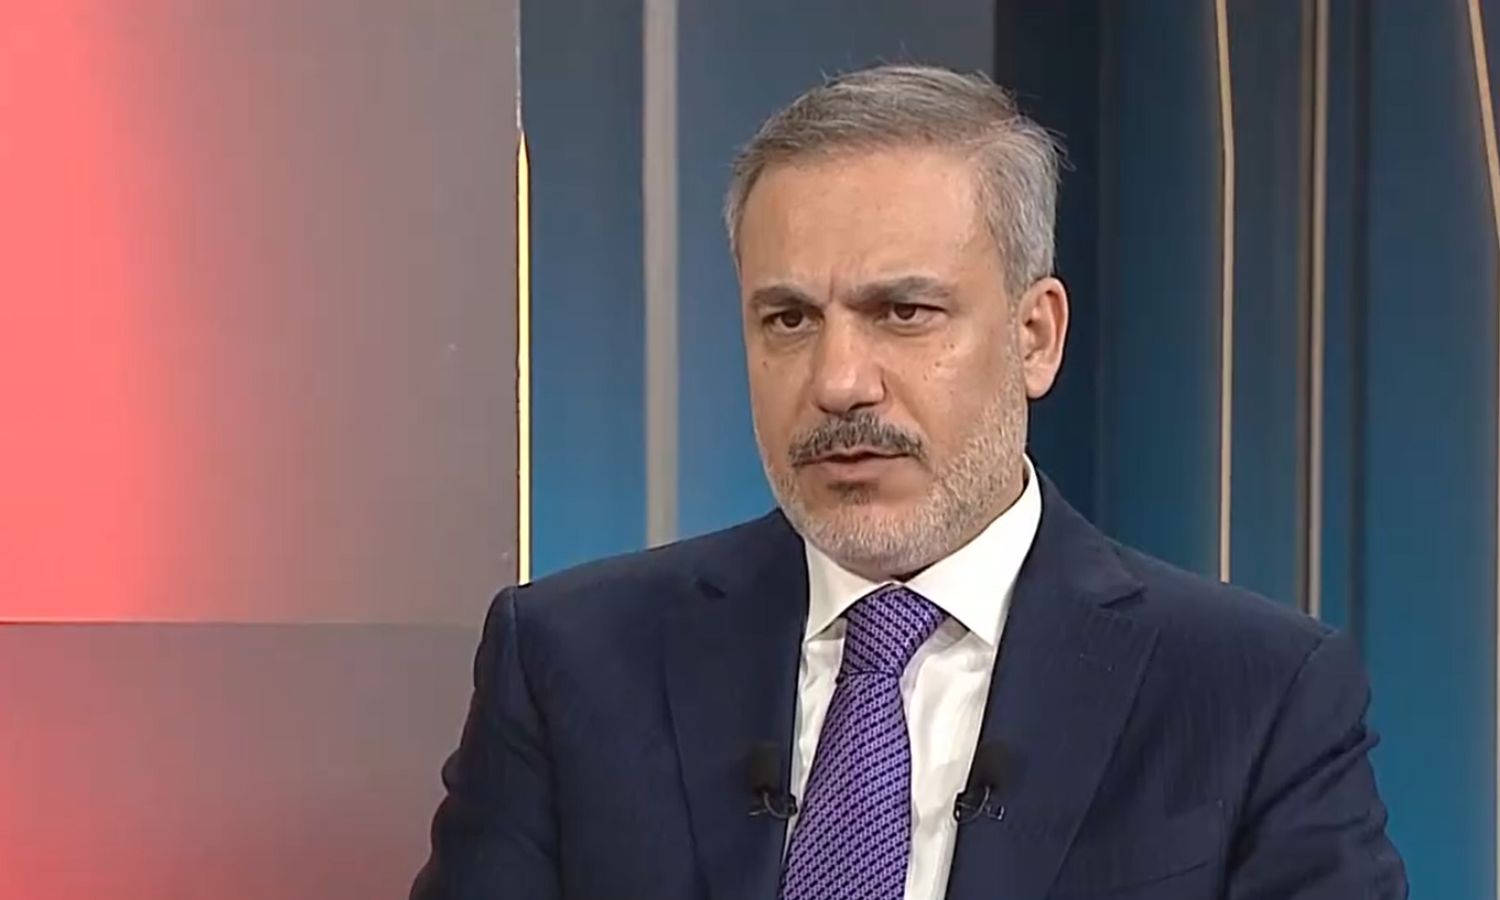 Turkish Foreign Minister, Hakan Fidan, conducts a filmed interview where he discusses the negotiations with the Syrian regime and Ankara’s security concerns in Syria - February 4, 2024 (Sabah newspaper)